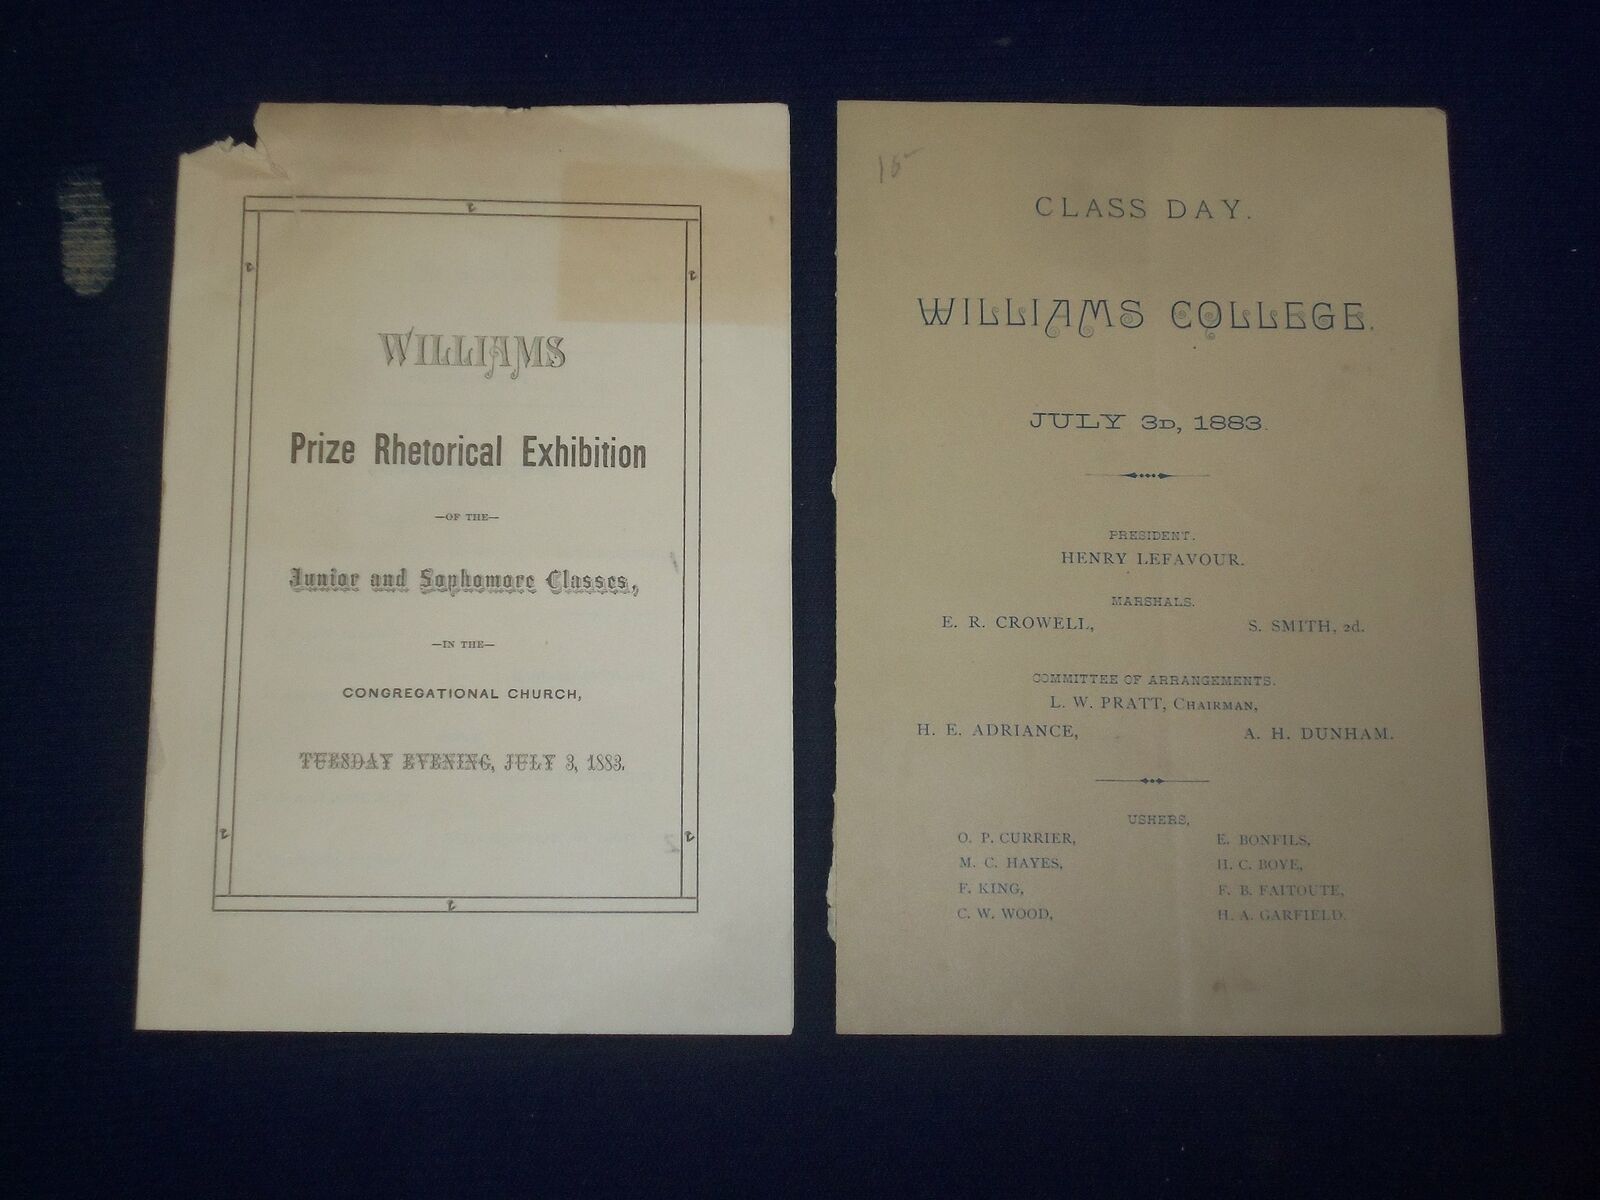 1883 JULY 3 WILLIAMS COLLEGE PROGRAMS - LOT OF 2 - J 4588